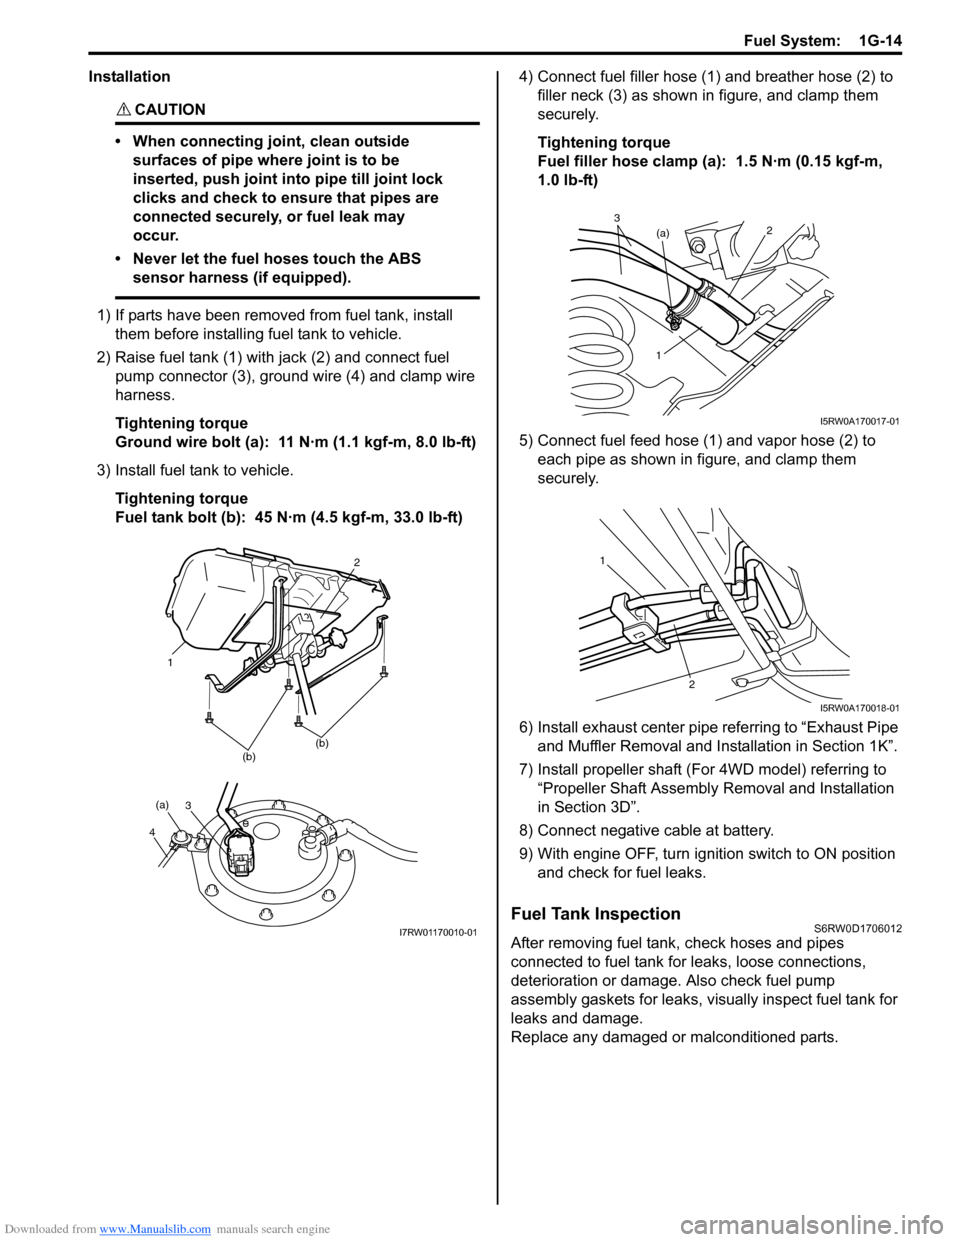 SUZUKI SX4 2006 1.G Service Workshop Manual Downloaded from www.Manualslib.com manuals search engine Fuel System:  1G-14
Installation
CAUTION! 
• When connecting joint, clean outside 
surfaces of pipe where joint is to be 
inserted, push join